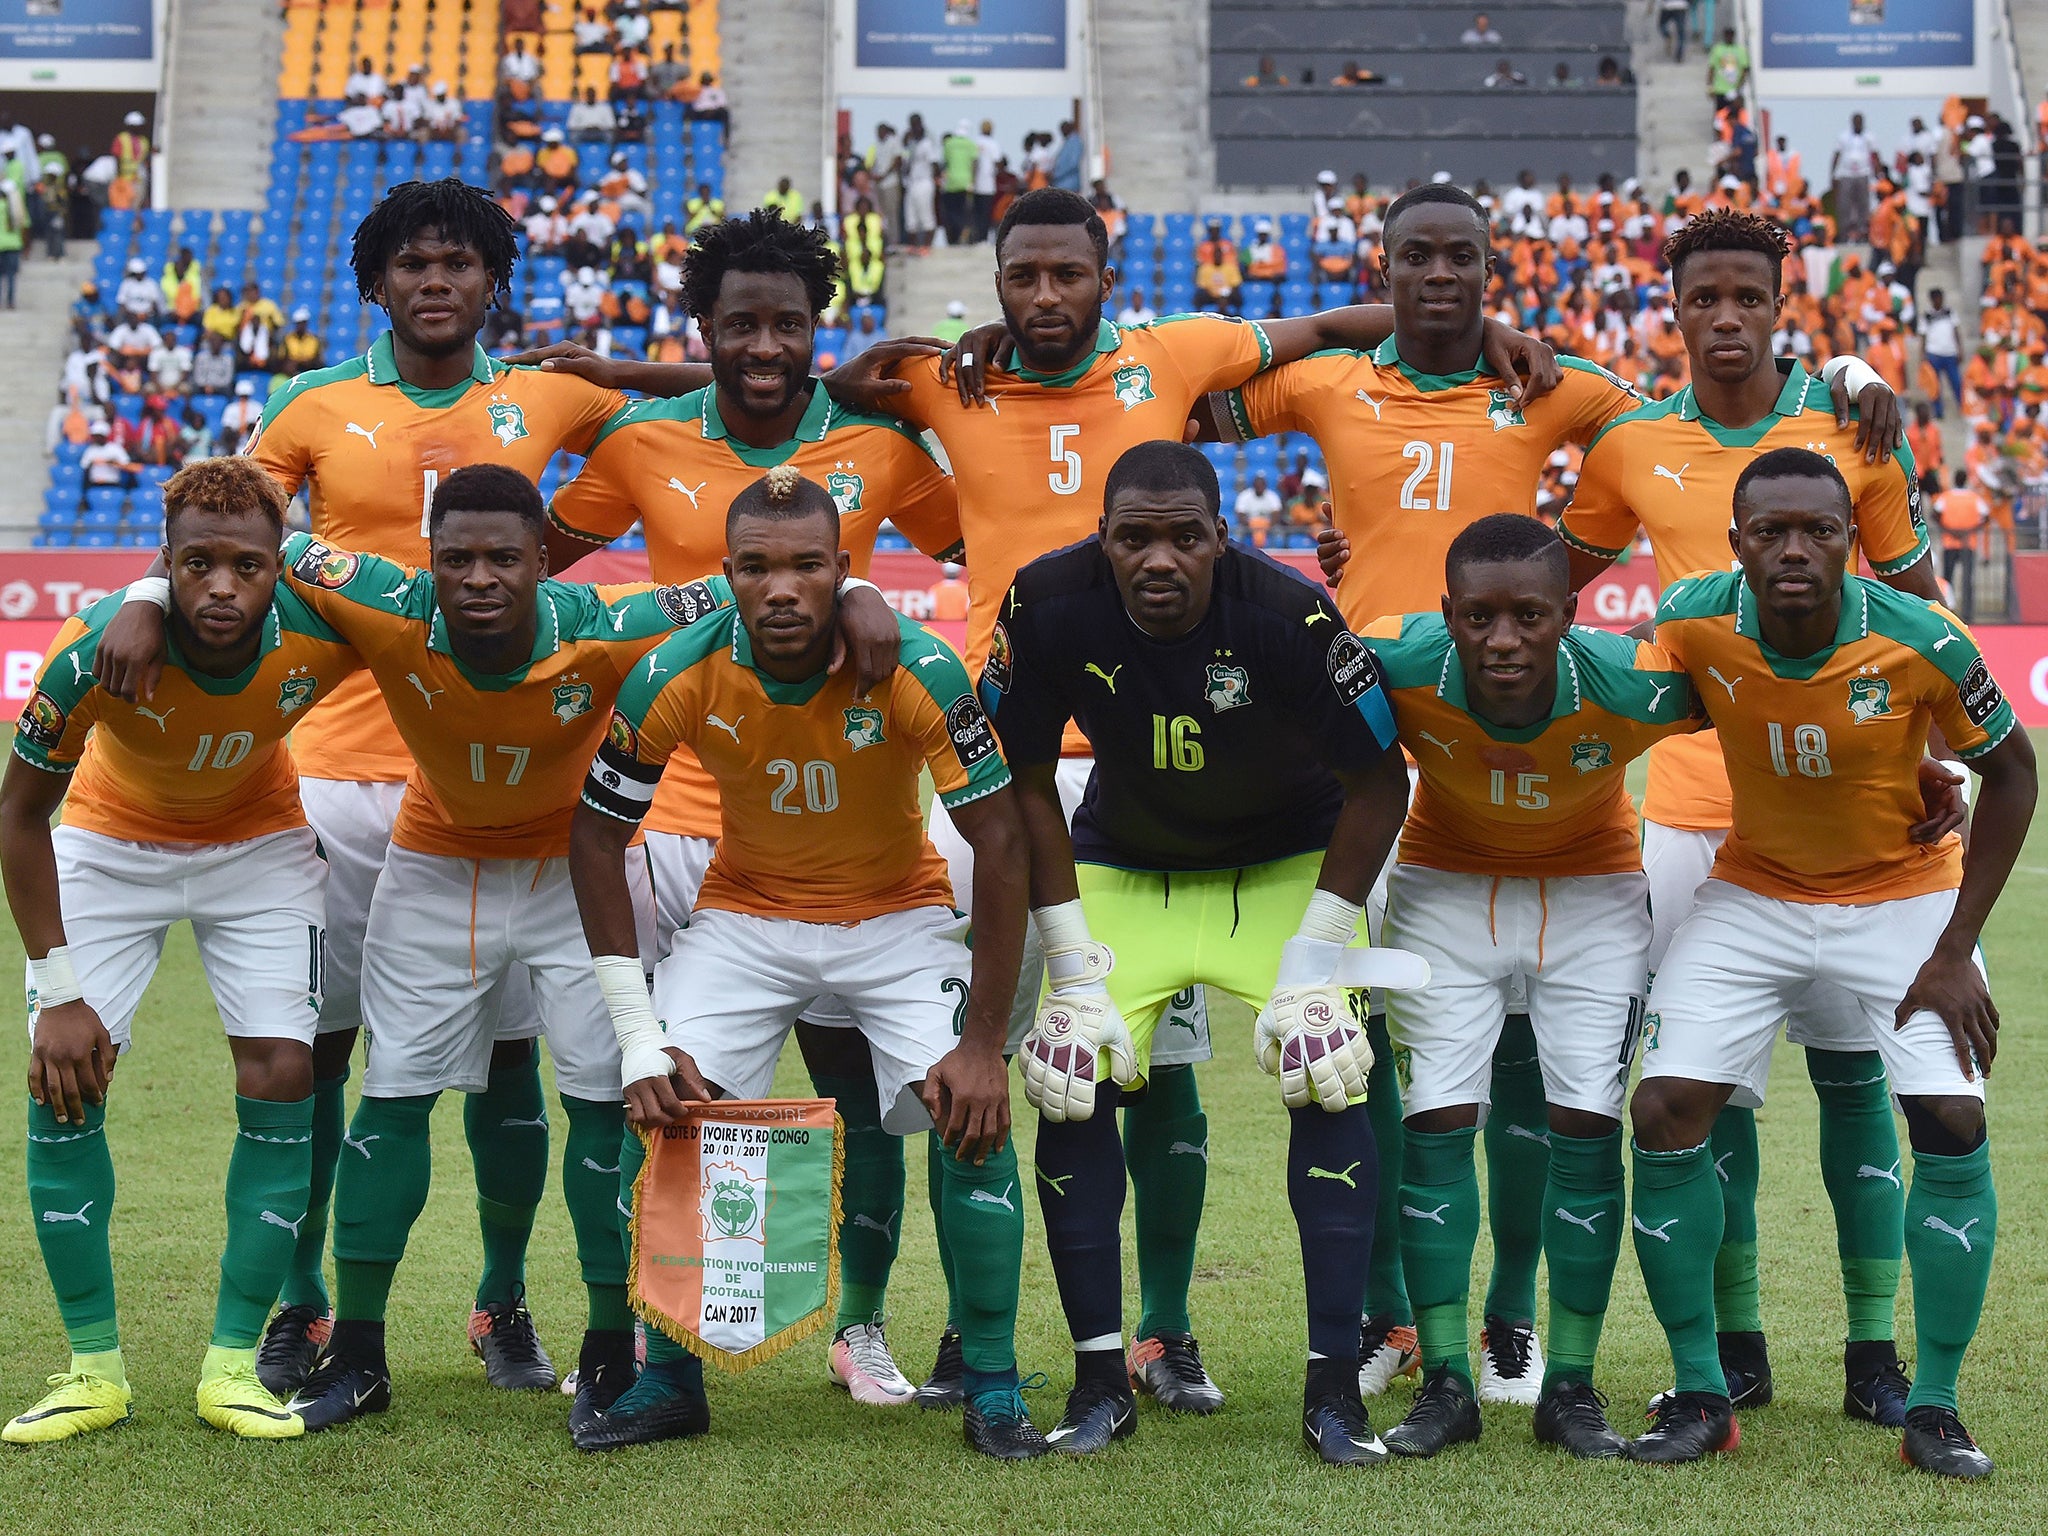 Zaha (top right) with his Cote d’Ivoire team-mates